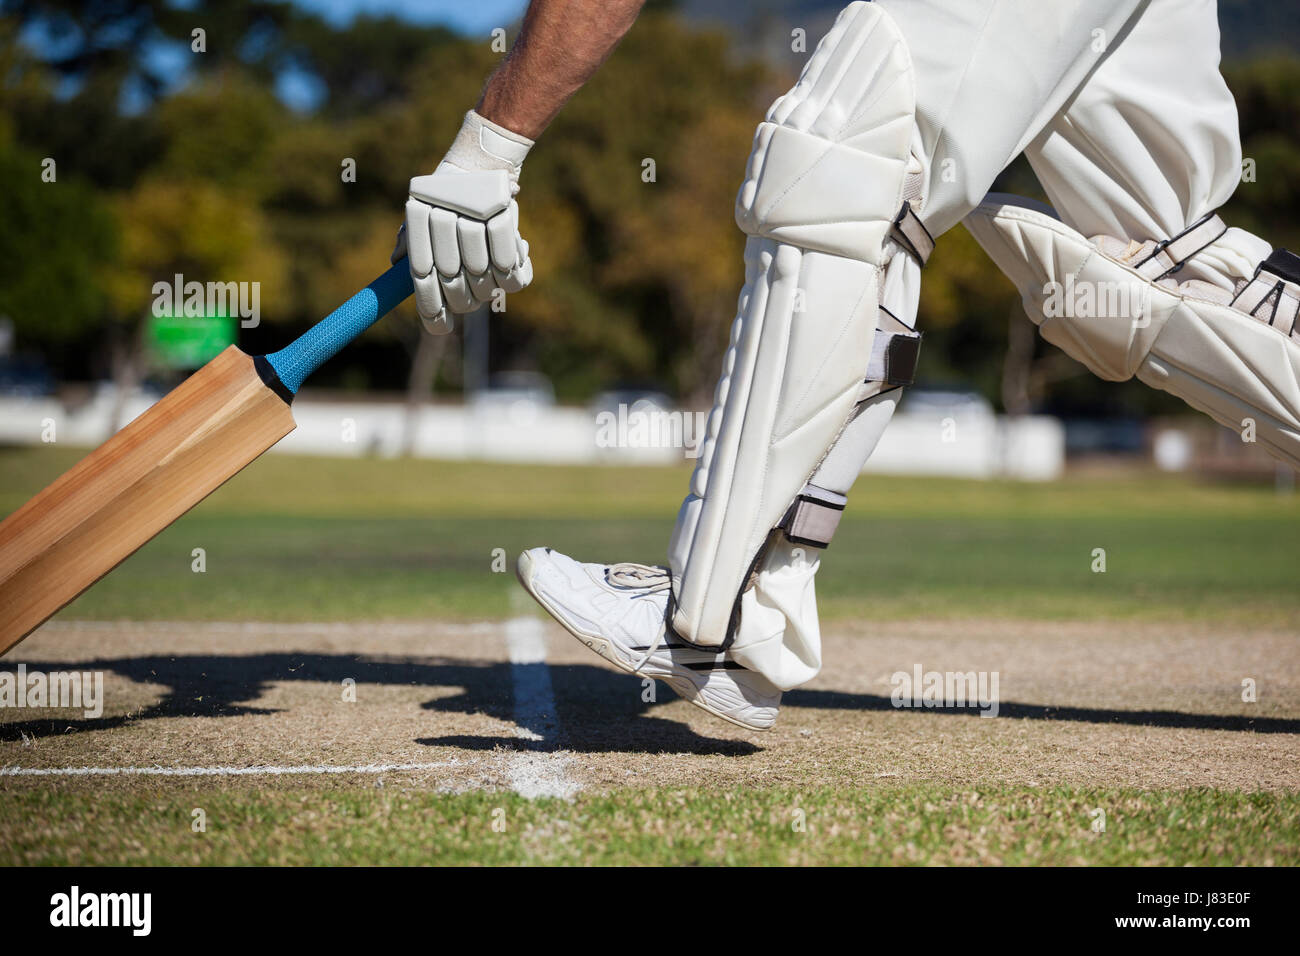 Low section of cricket player scoring run on field during sunny day Stock Photo